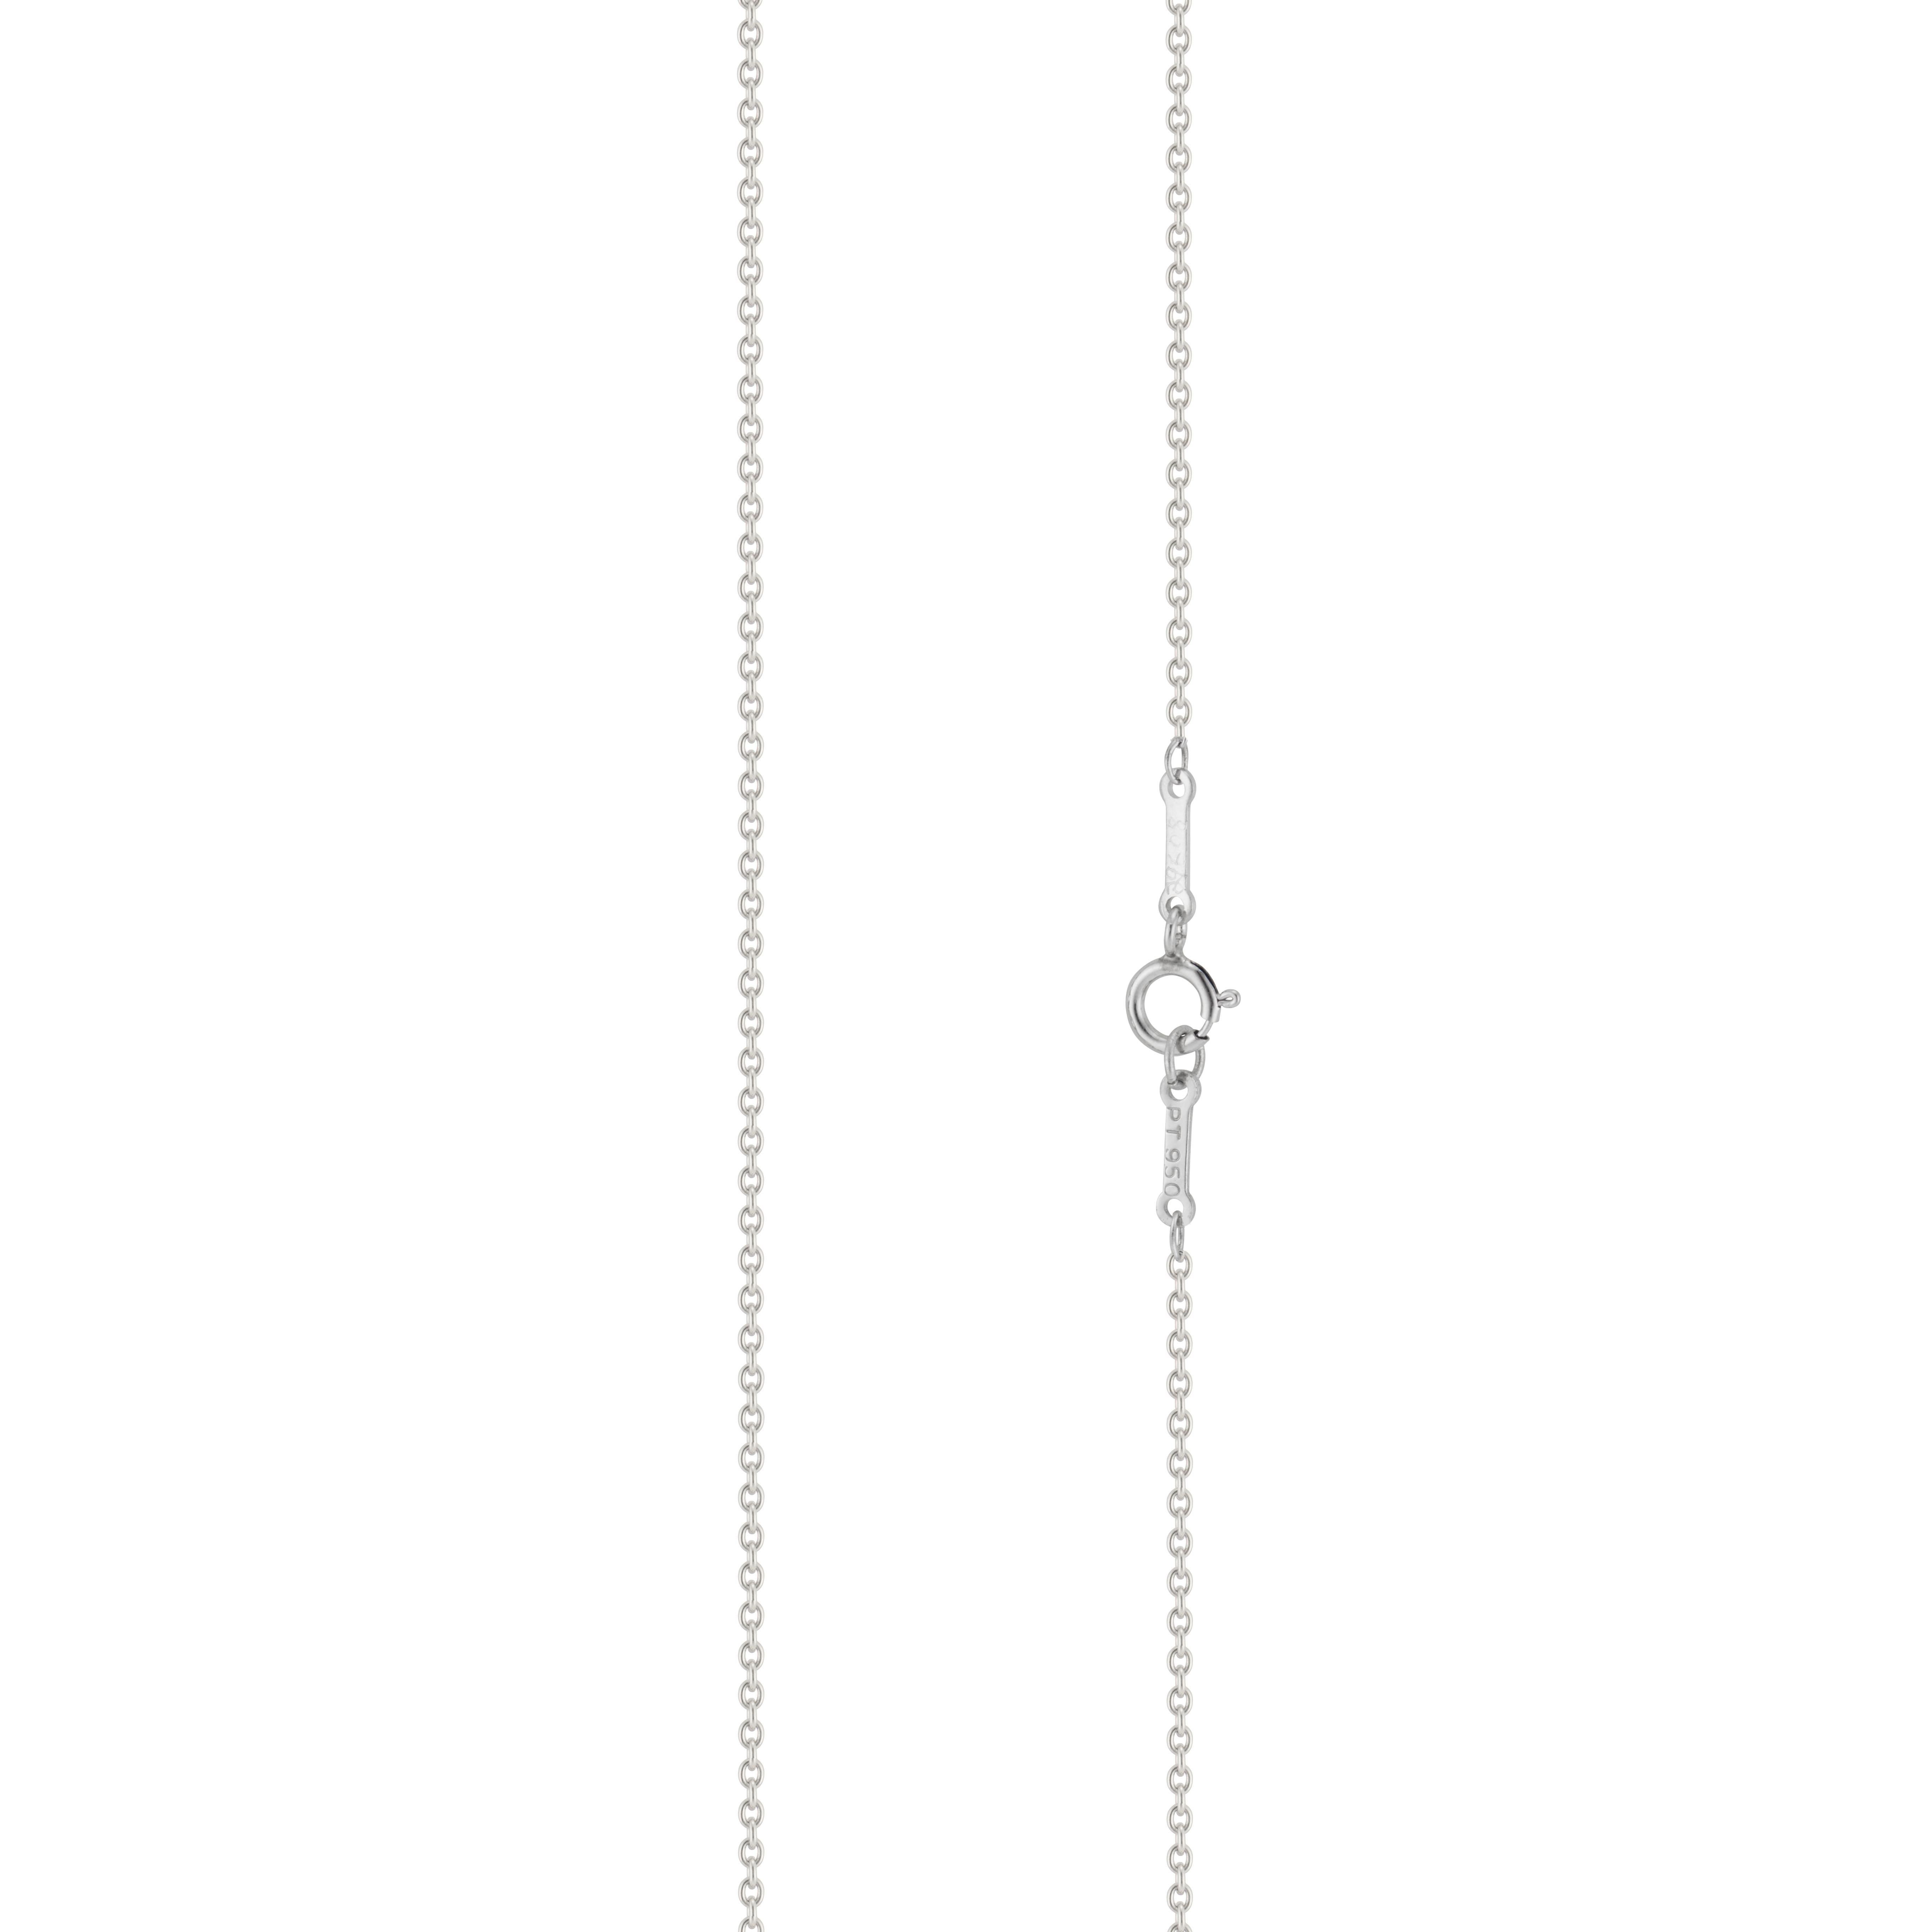 TIffany & Co Elsa Peretti Diamond by the yard platinum necklace. 16 inches in length. 

1 round brilliant cut diamond, G VS approx. .20cts 
Platinum 
Stamped: PT 950
Hallmark: Tiffany + Co Peretti
2.3 grams
Top to bottom: 4.7mm or 3/16 Inch
Width: